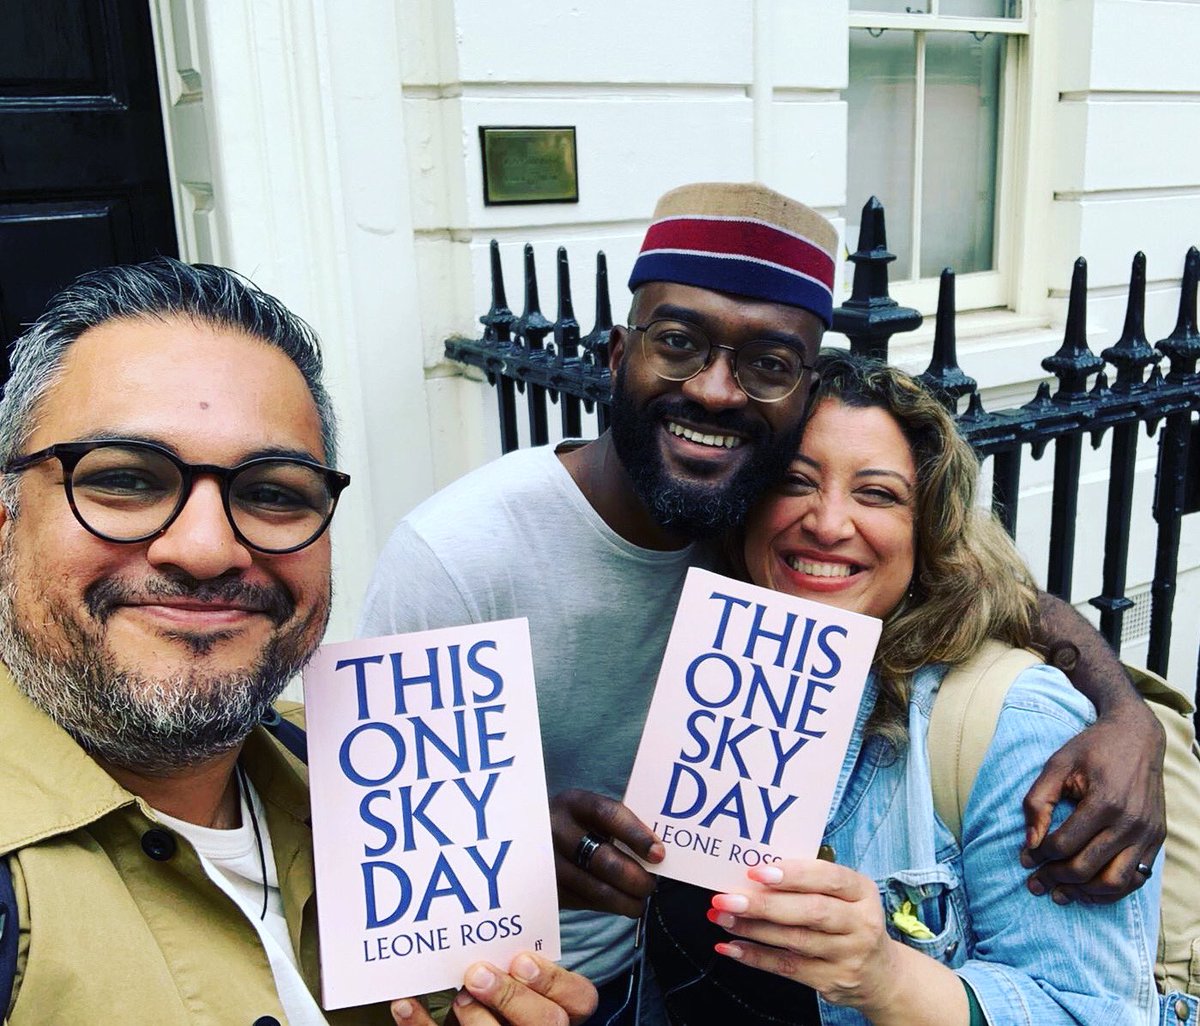 And finally, for now: my next book is the novel This One Sky Day, due out with  @FaberBooks in April 2021. Published as Popisho in the US by Farrar Straus & Giroux. Here I am with  @InuaEllams and  @nikeshshukla holding the proof. Cover reveal on its way!!!